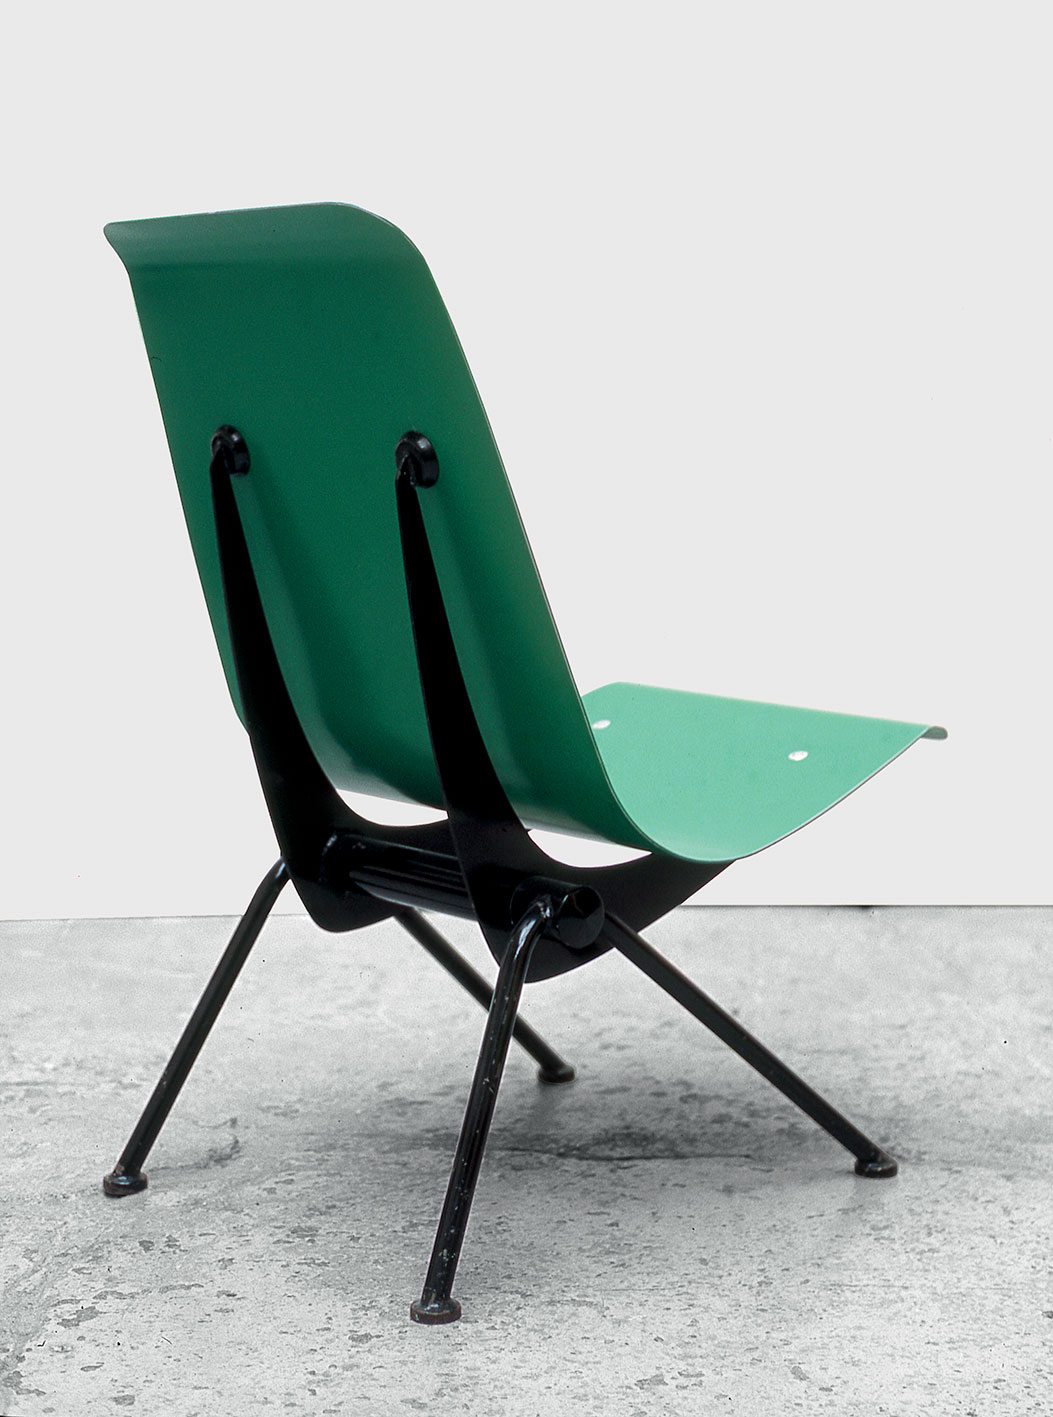 Fauteuil Léger no. 356, variant with seat in lacquered sheet aluminum, 1955.